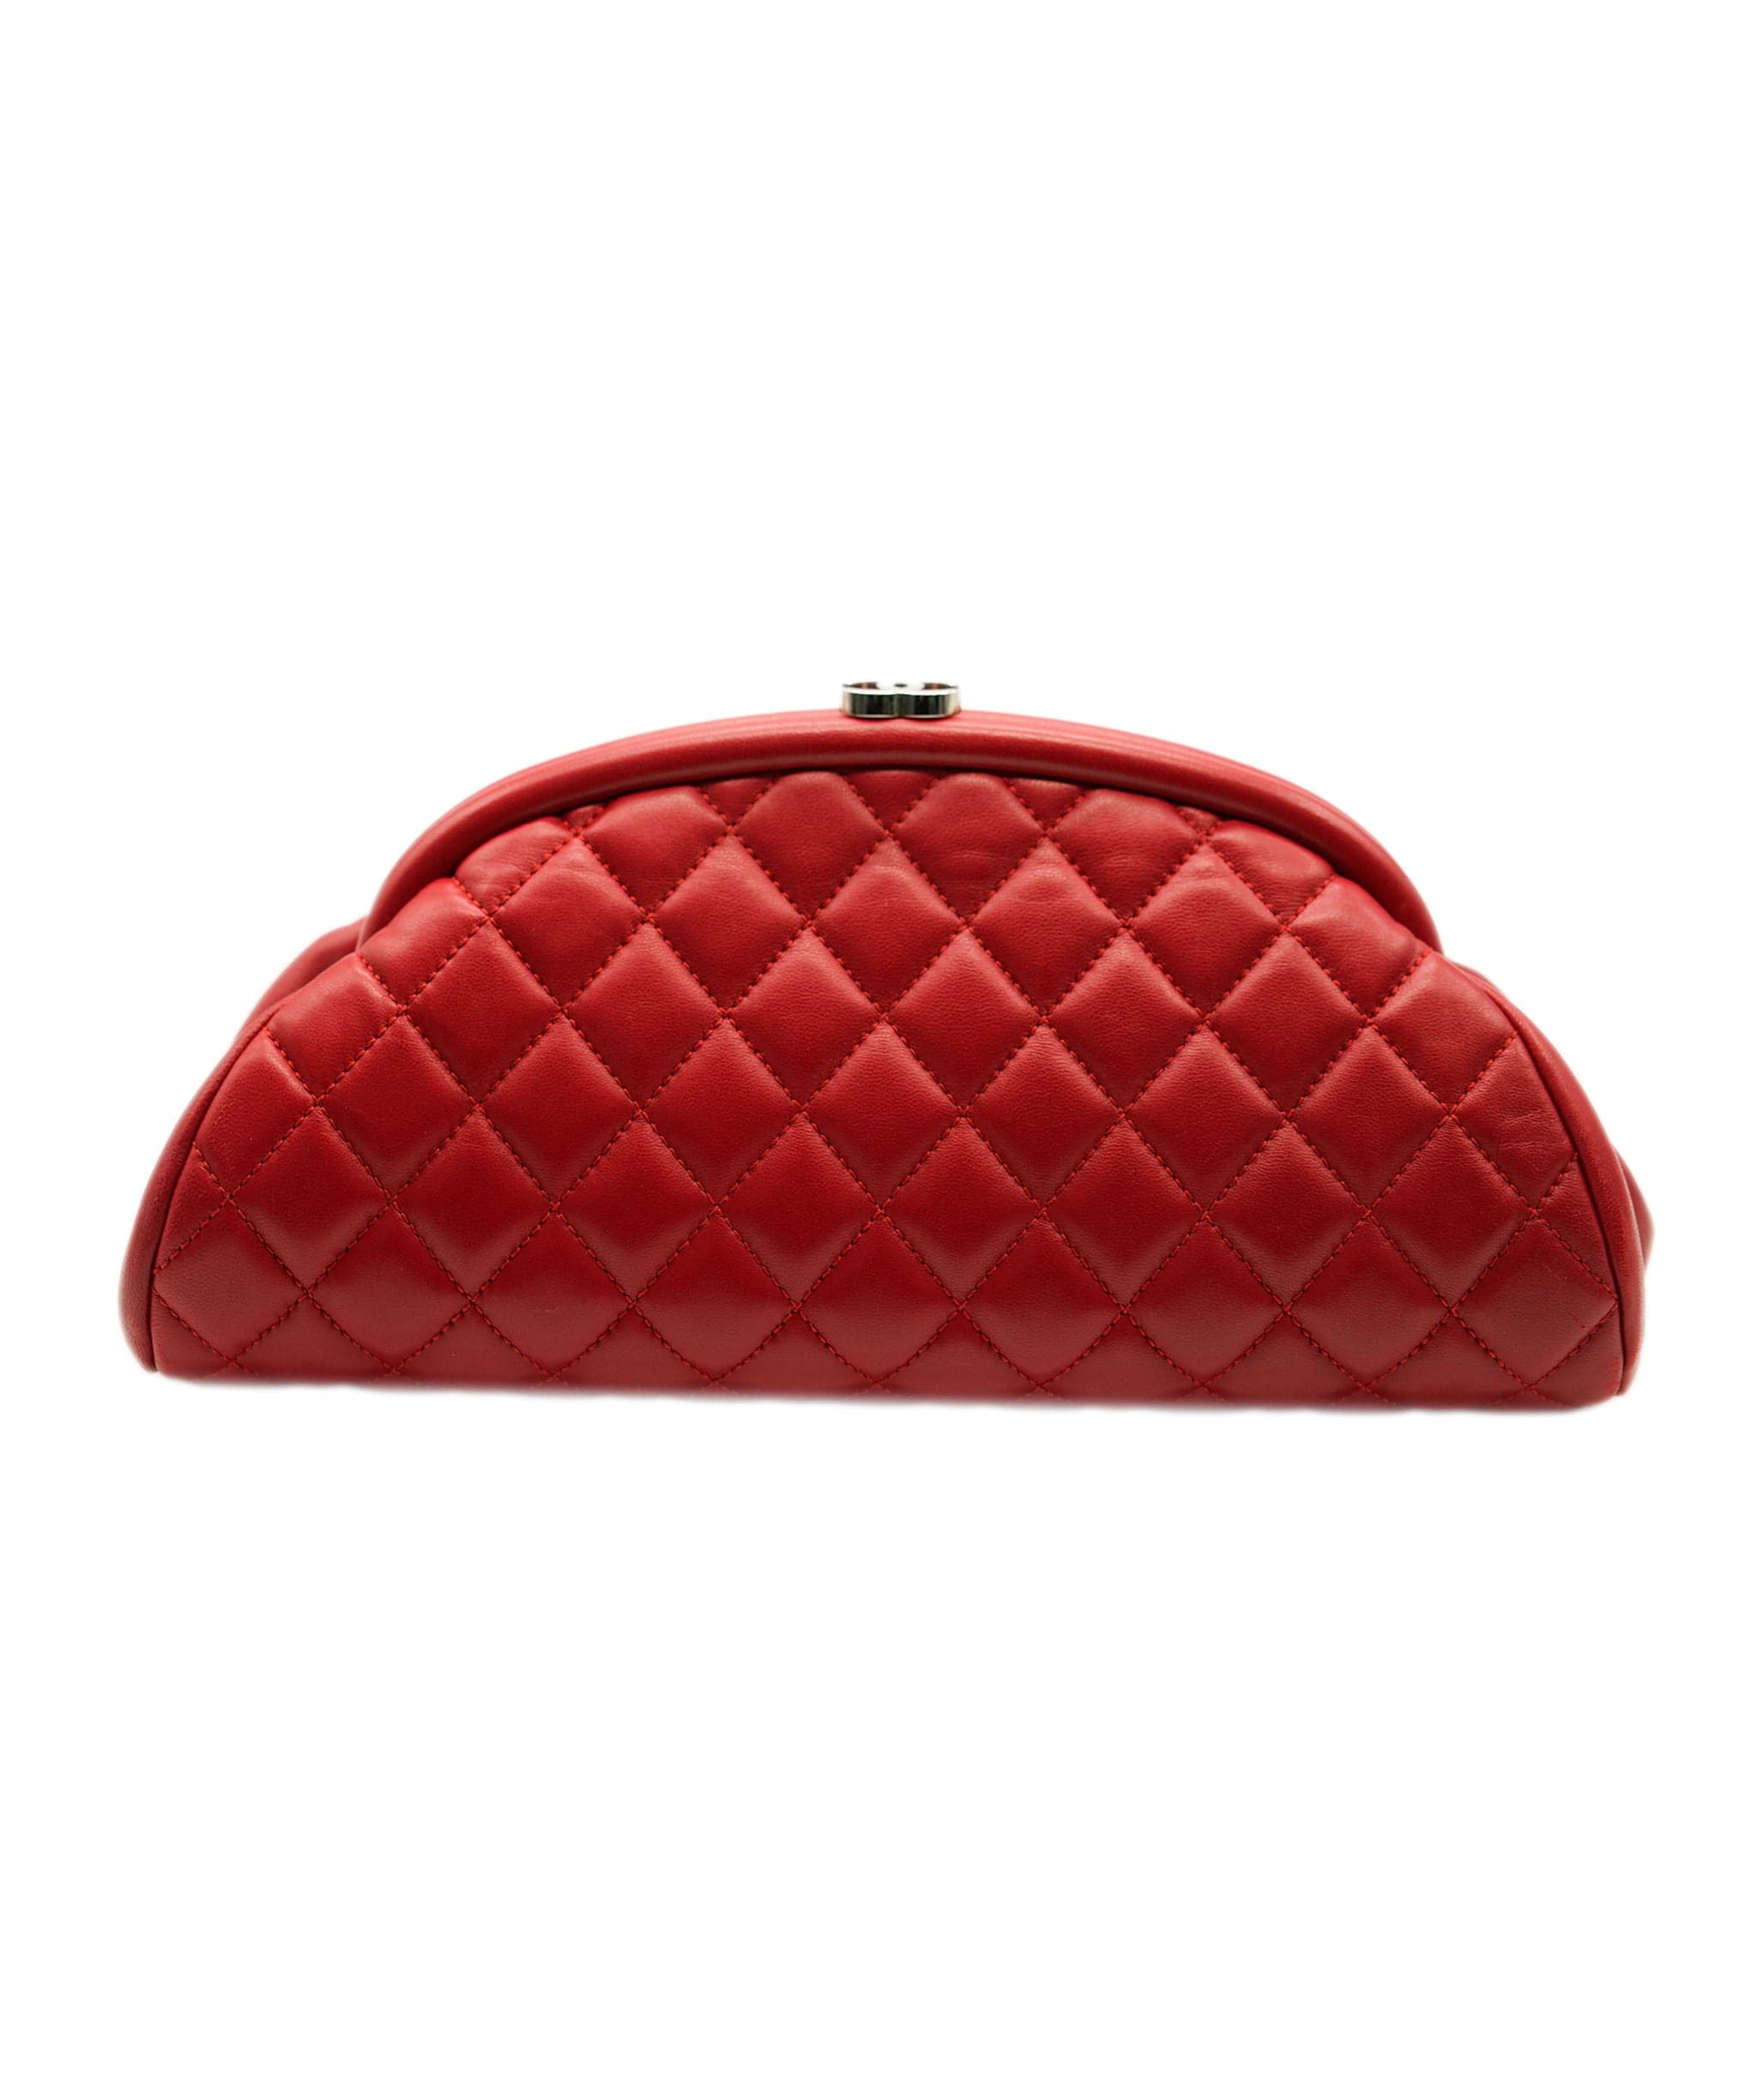 Chanel timeless red clutch bag ALC0271